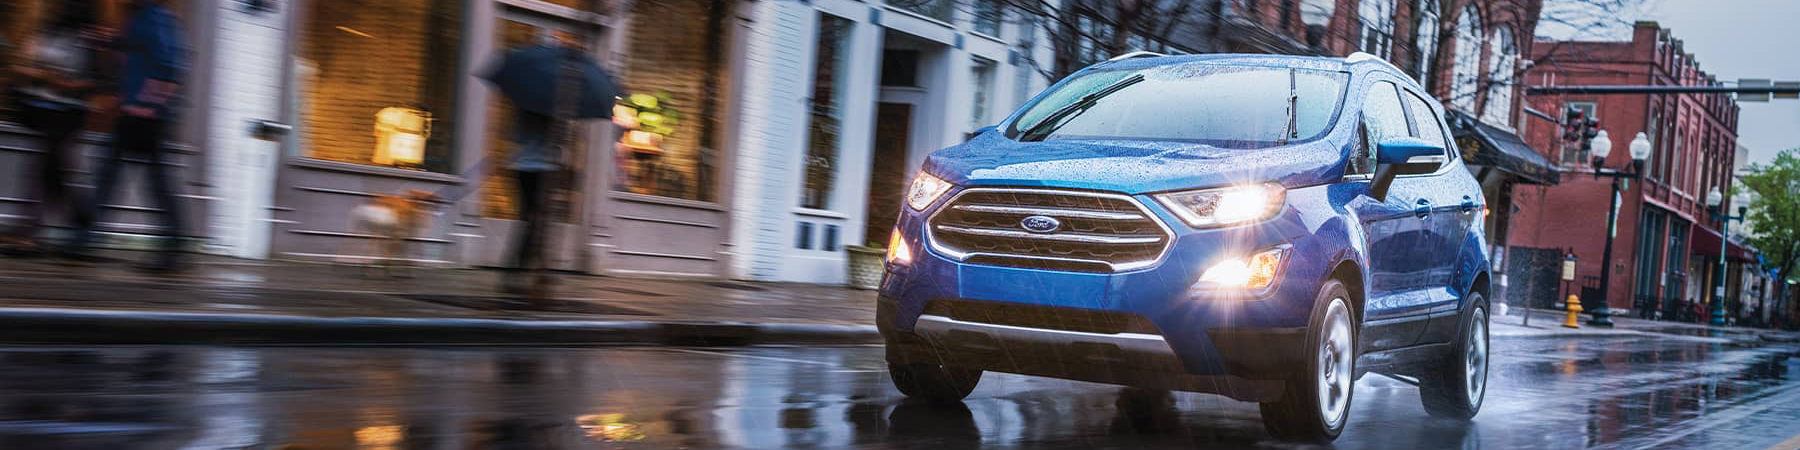 Blue 2021 Ford EcoSport driving on a rainy suburban town street